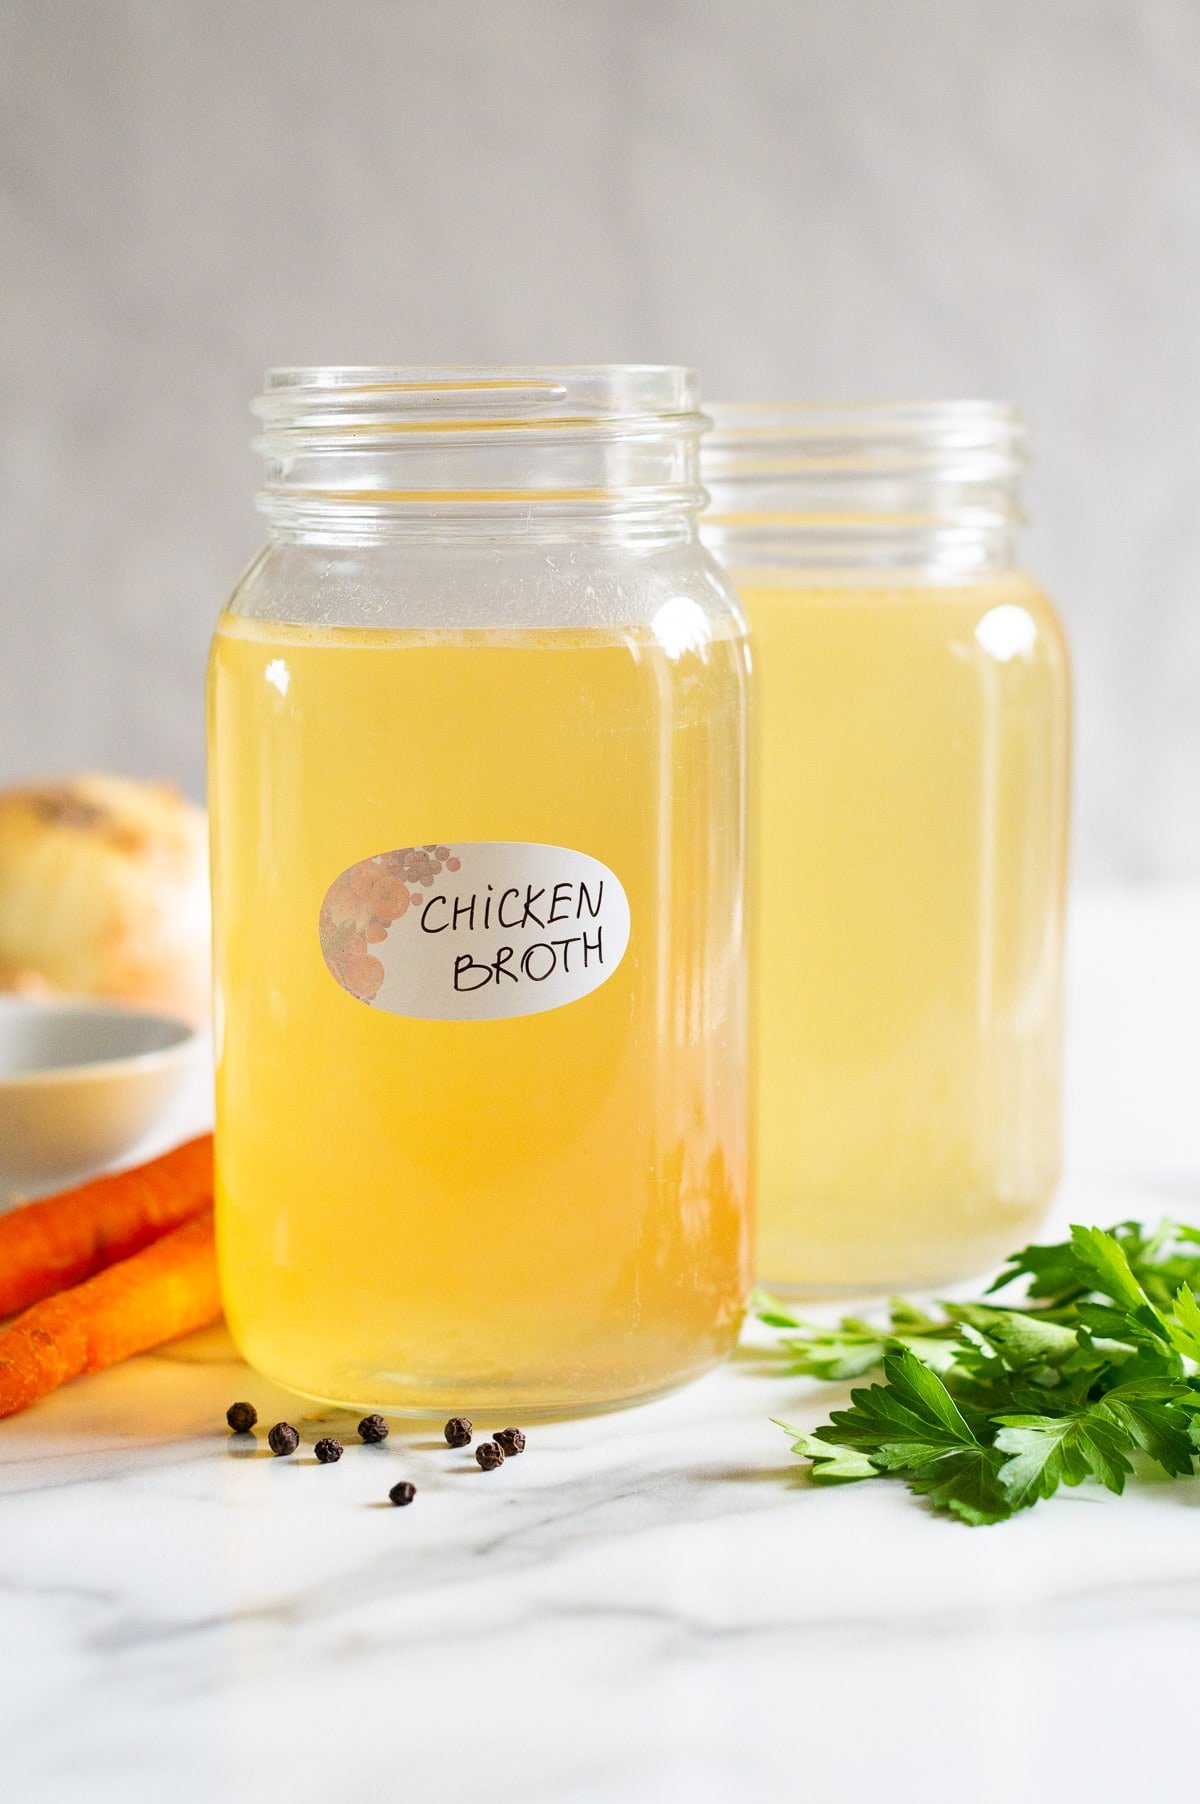 Chicken broth in glass jars with vegetables on a counter.